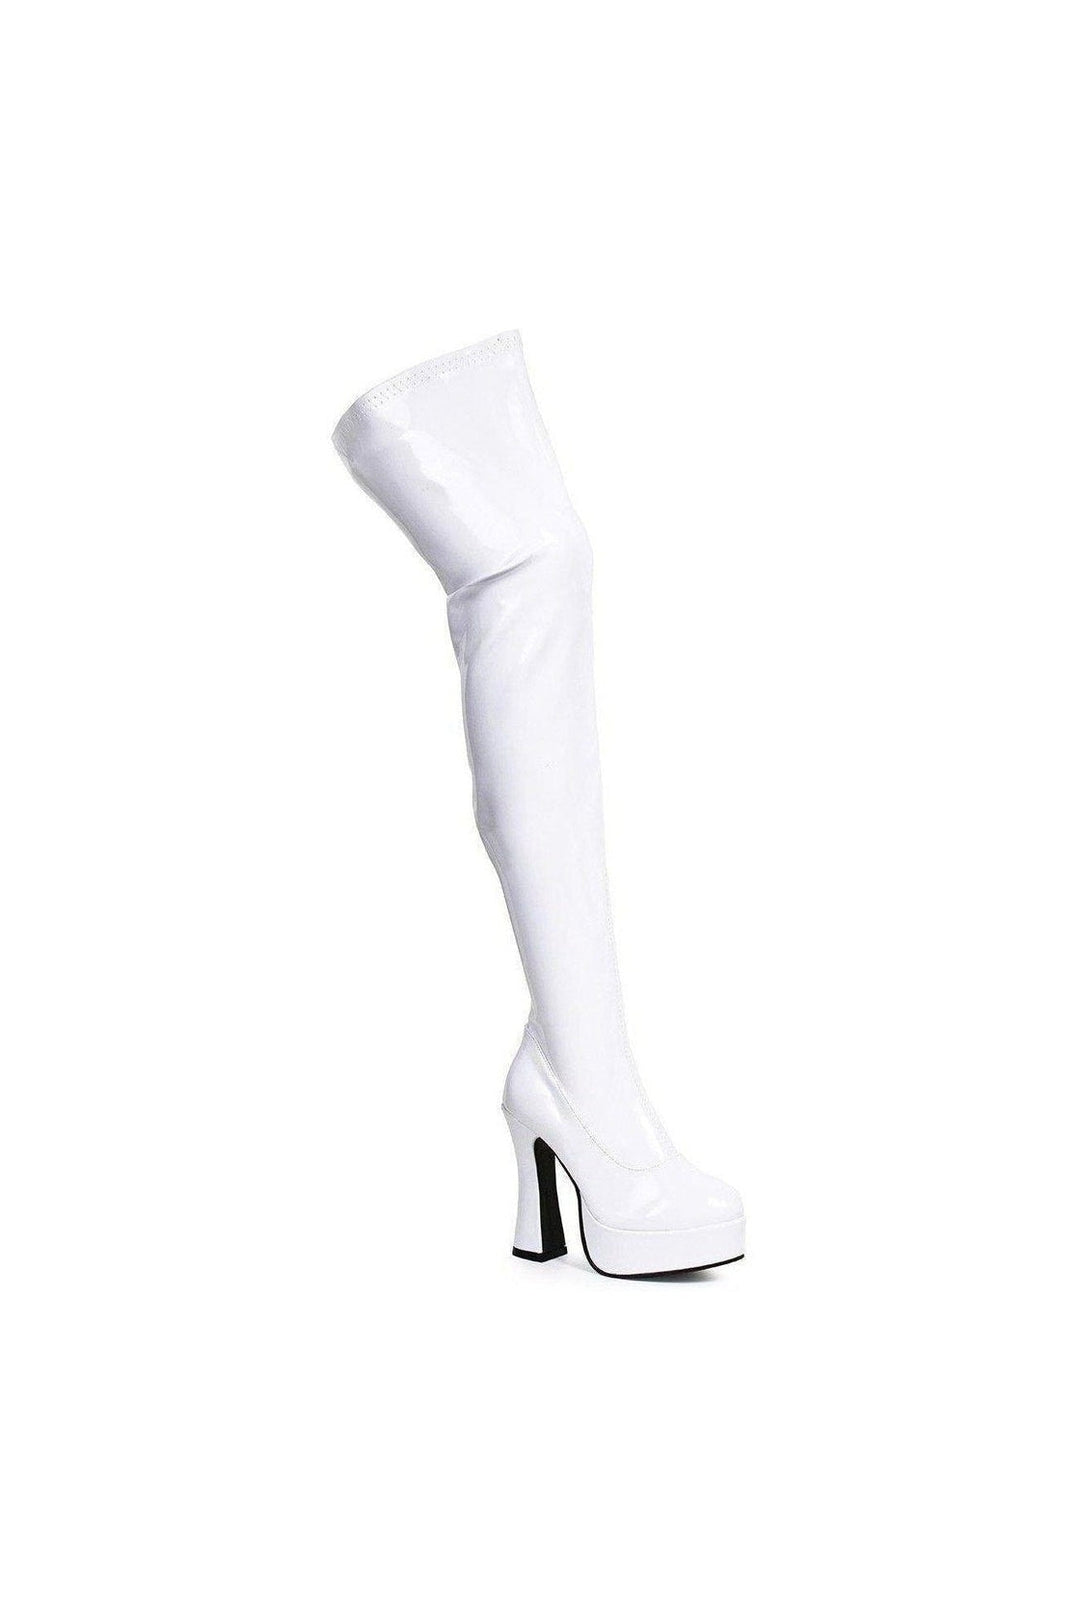 THRILL Thigh Boot | White Patent-Ellie Shoes-SEXYSHOES.COM